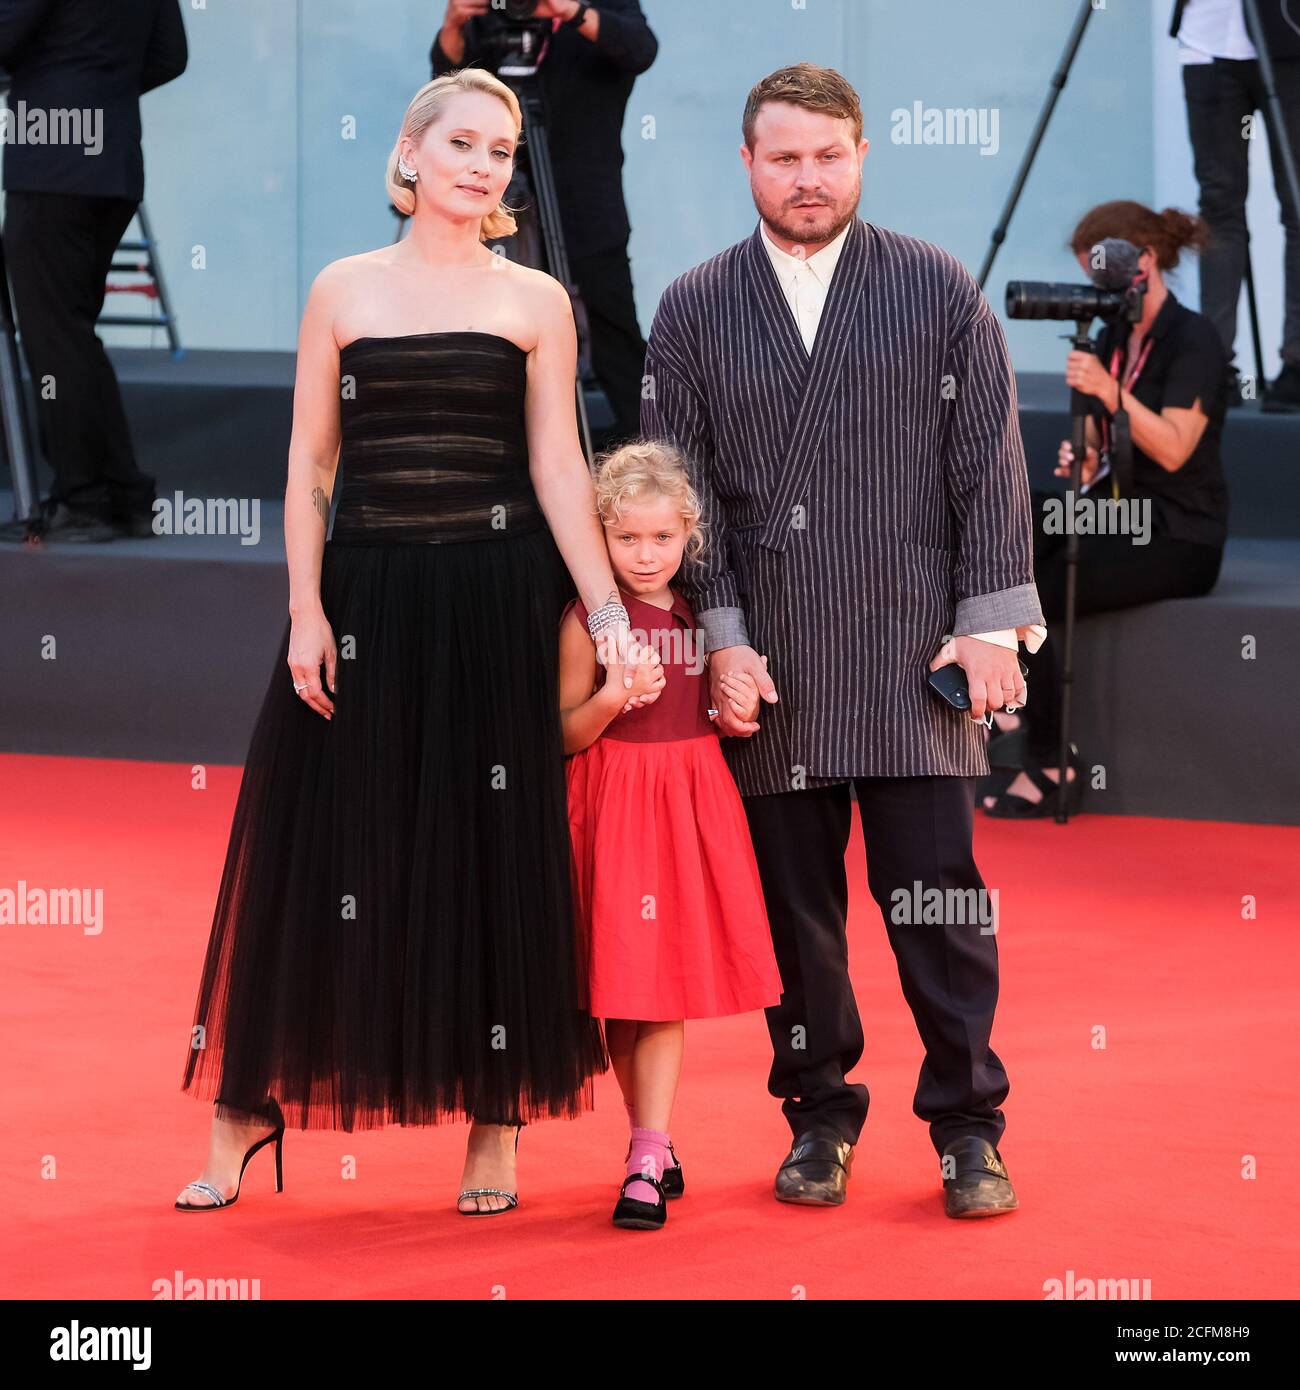 Palazzo del Cinema, Lido, Venice, Italy. 6th Sep, 2020. Mona Fastvold, Adelaide James Fastvold Corbet, Brady Corbet poses on the red carpet at The World to Come. Picture by Credit: Julie Edwards/Alamy Live News Stock Photo